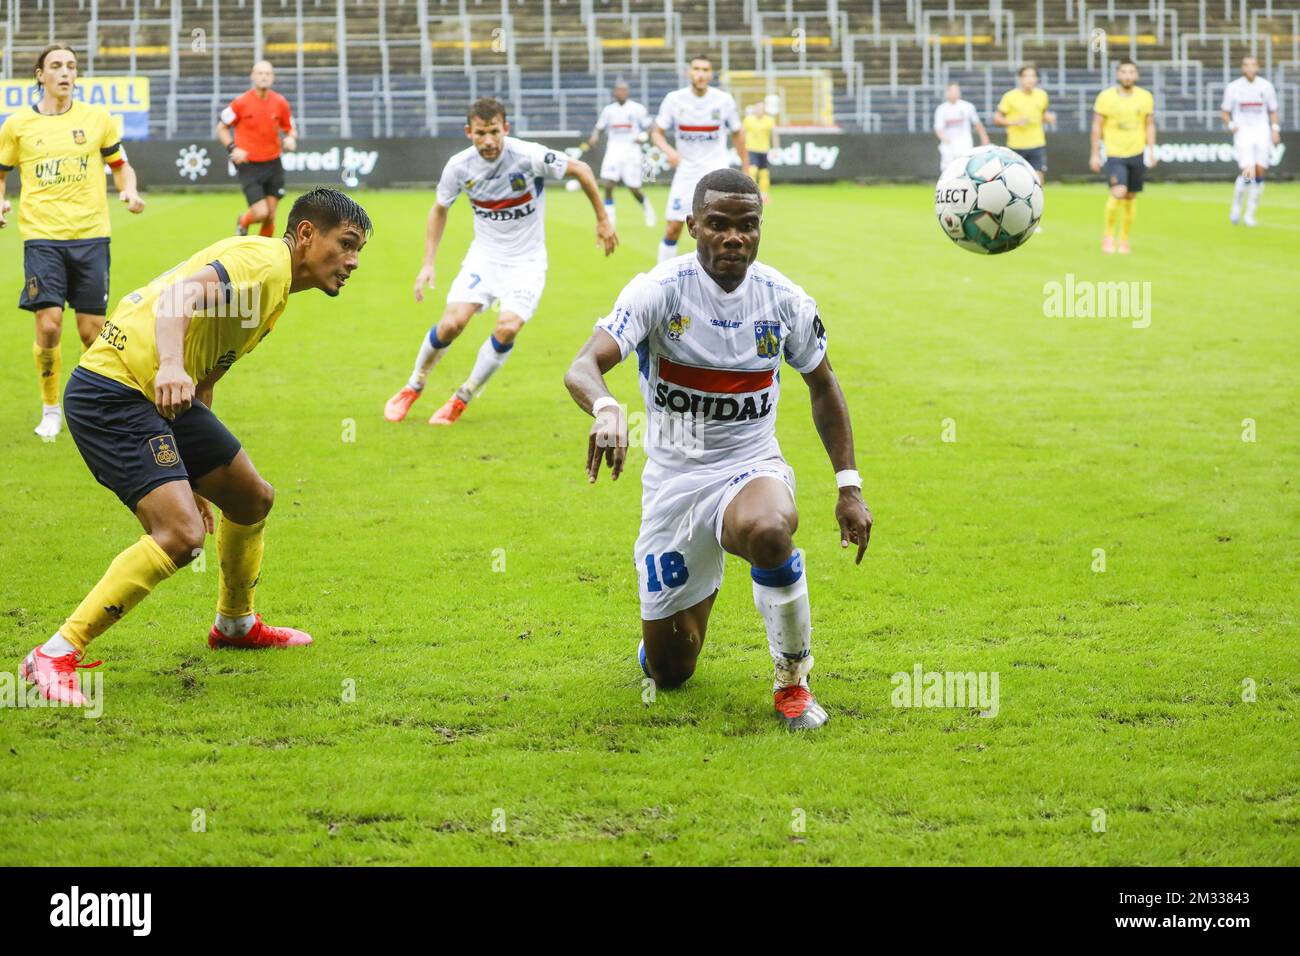 Union's Federico Vega and Westerlo's Kouya Mabea fight for the ball during a soccer match between Union Saint-Gilloise and KVC Westerlo, Sunday 30 August 2020 in Brussels, on day 2 of the 'Proximus League' 1B second division of the Belgian soccer championship. BELGA PHOTO THIERRY ROGE Stock Photo